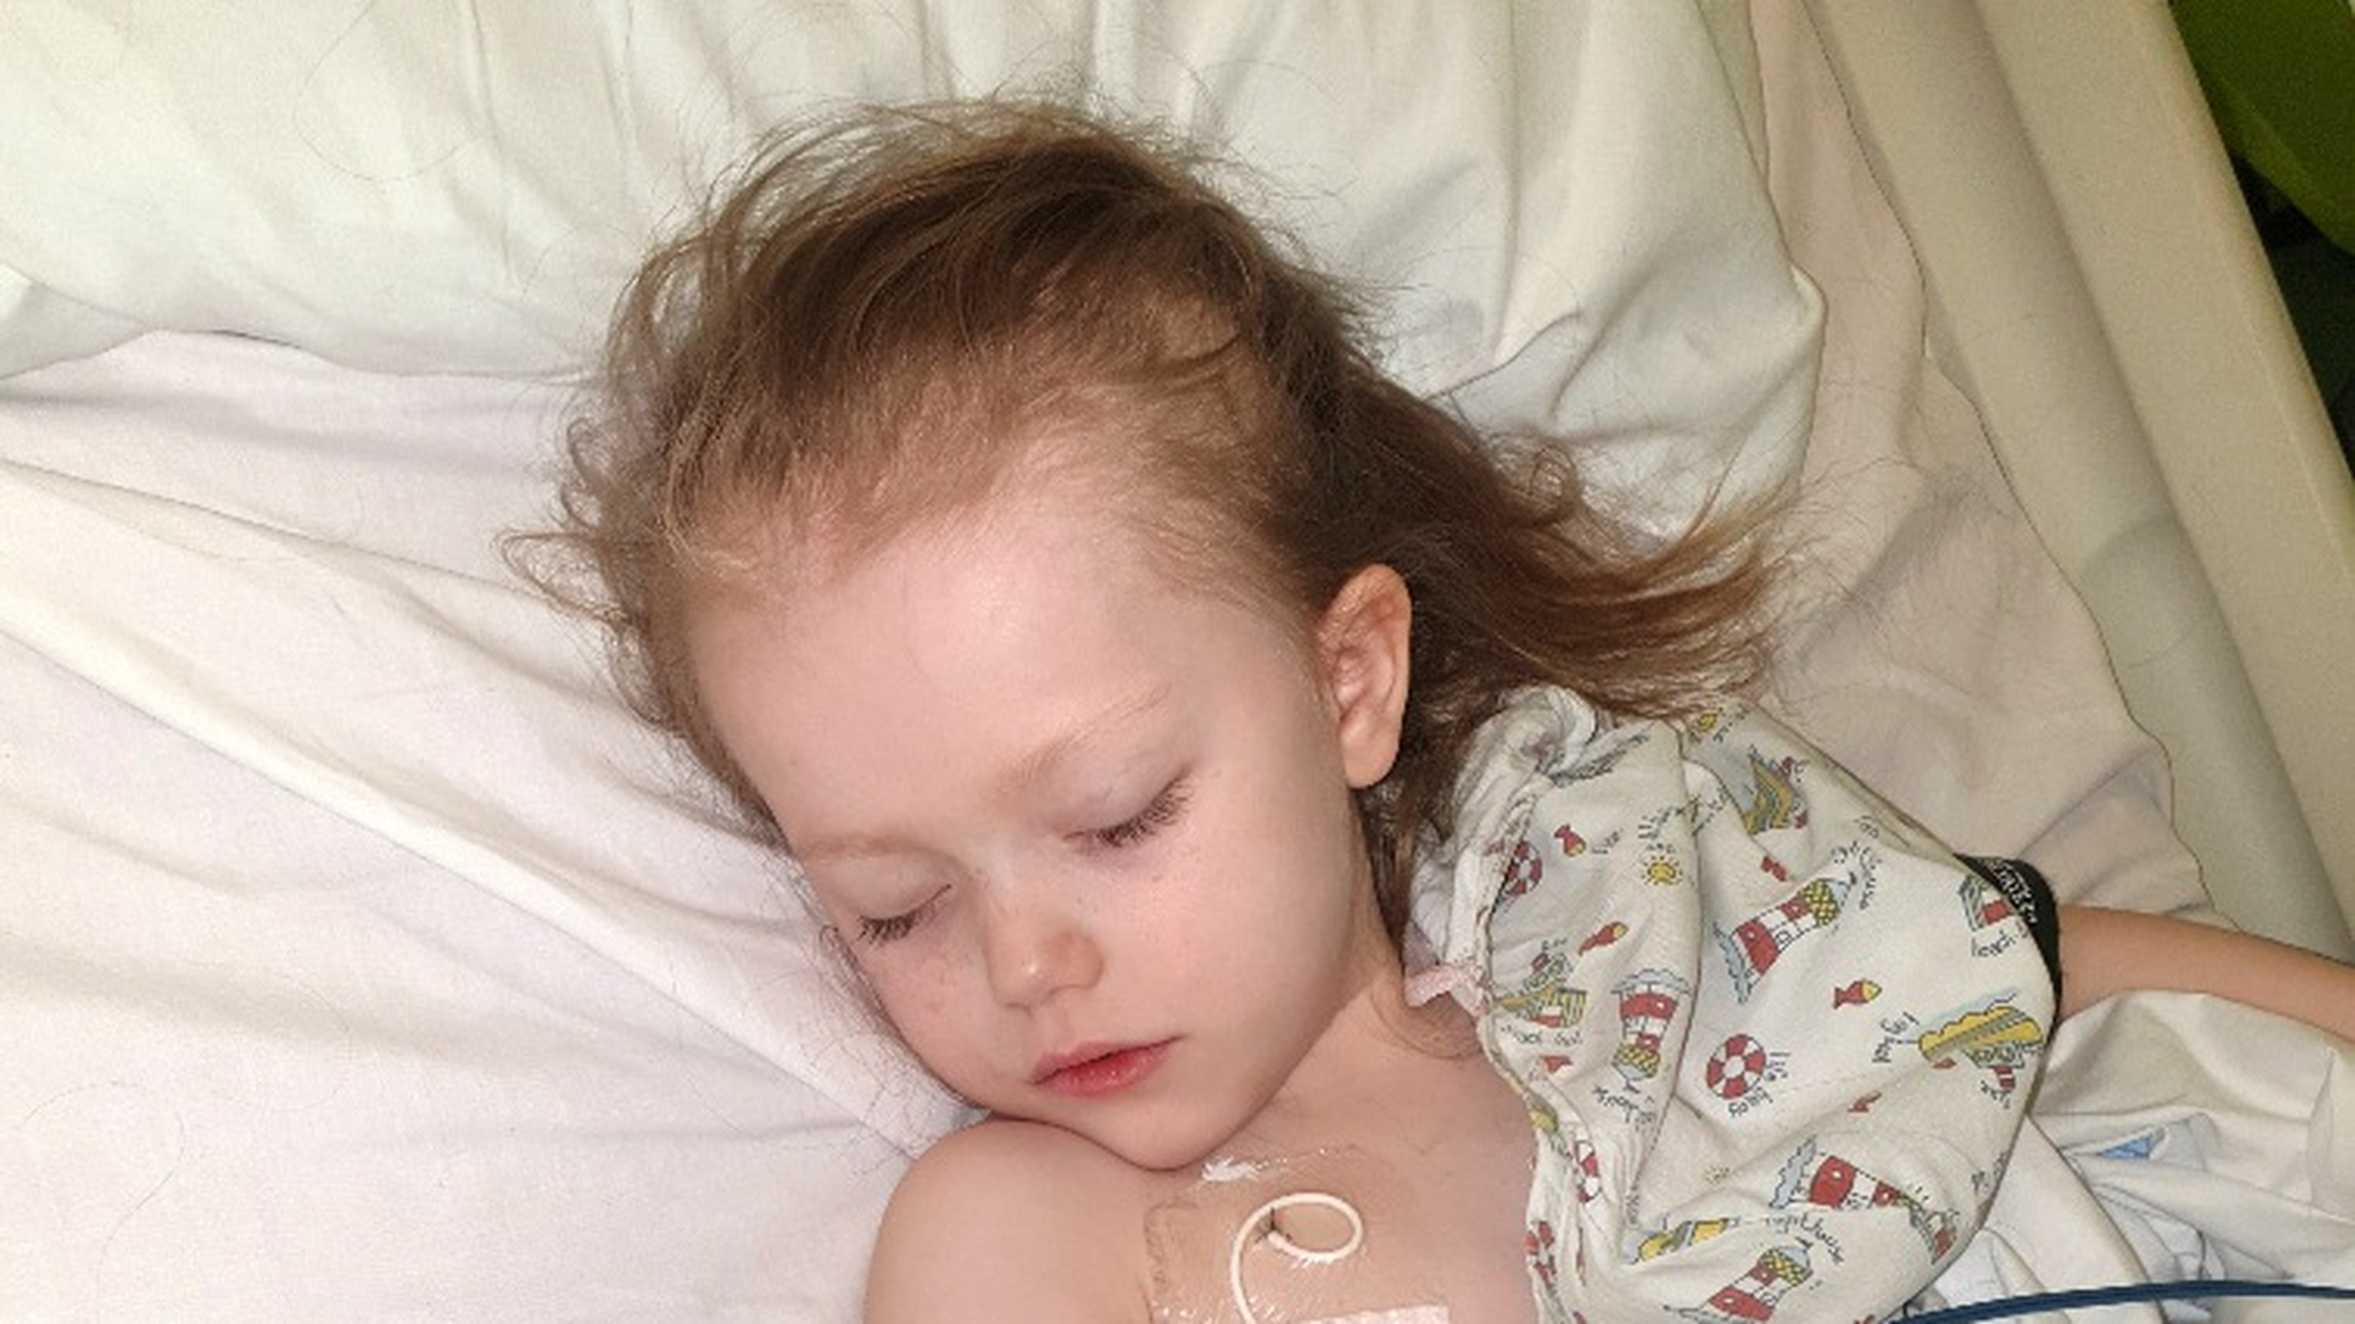 Lottie, sleeping in her hospital bed during treatment